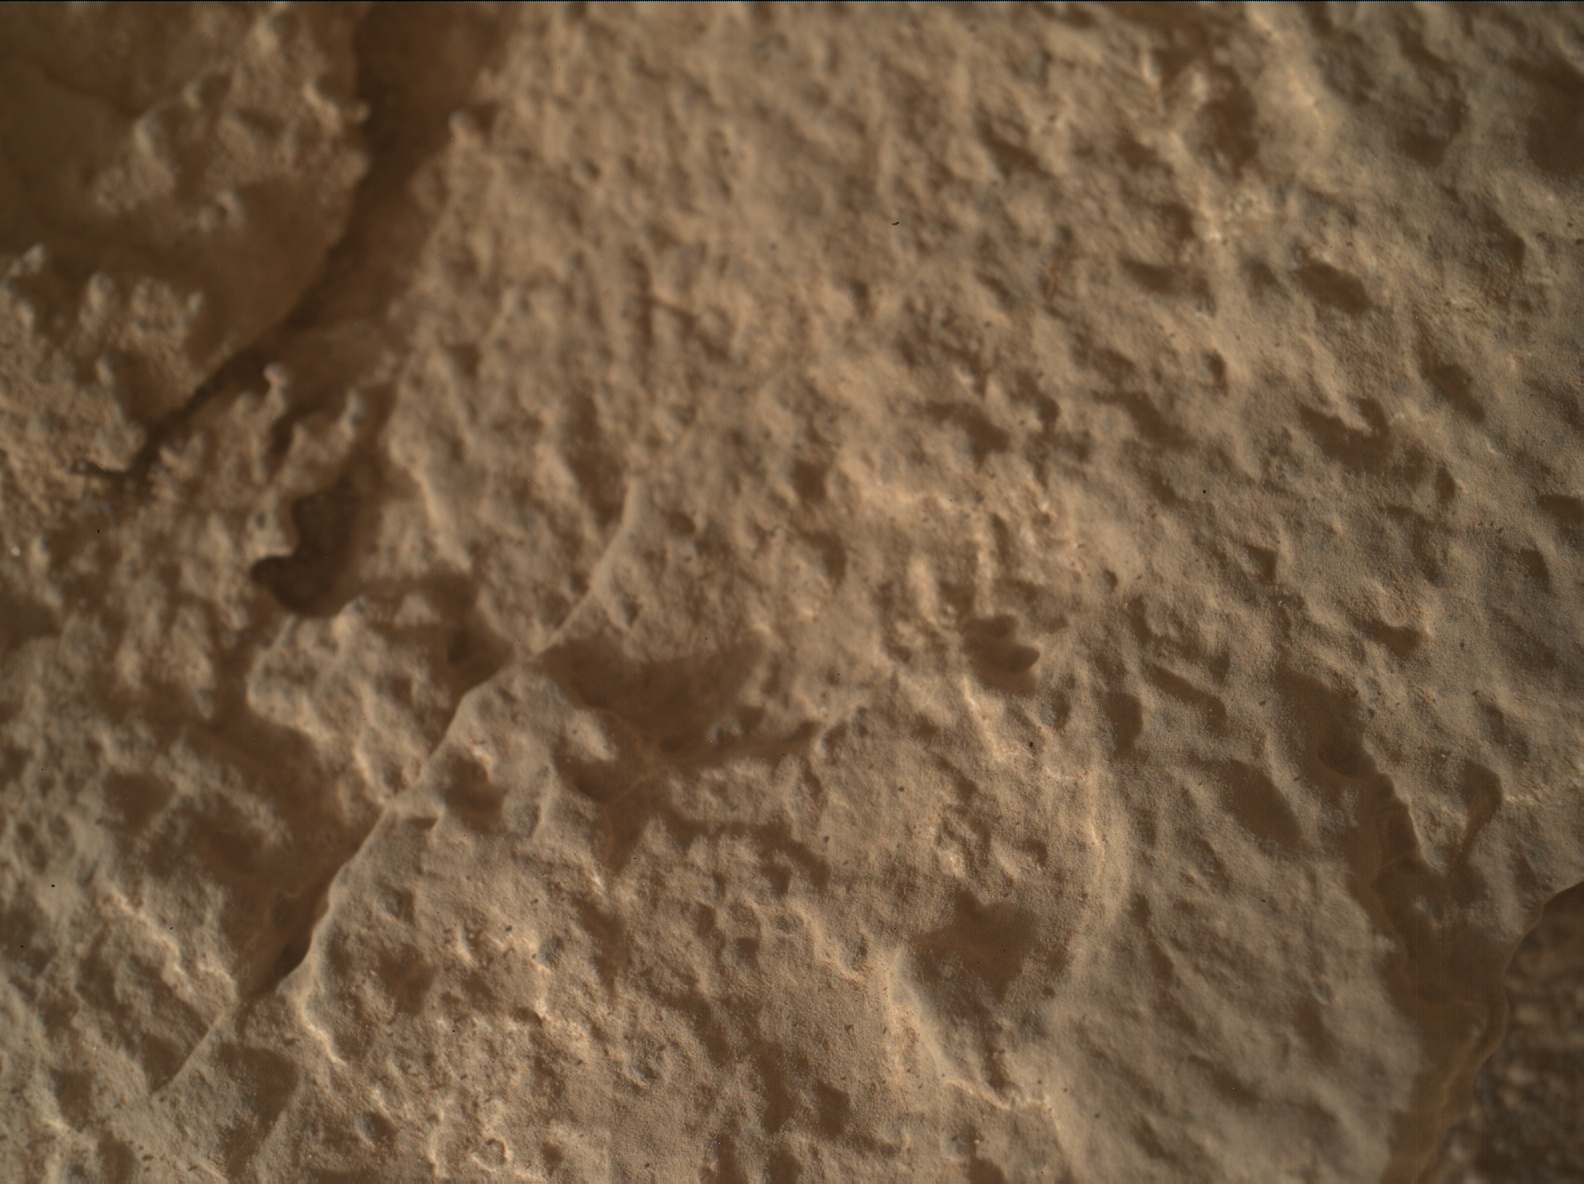 Nasa's Mars rover Curiosity acquired this image using its Mars Hand Lens Imager (MAHLI) on Sol 3532